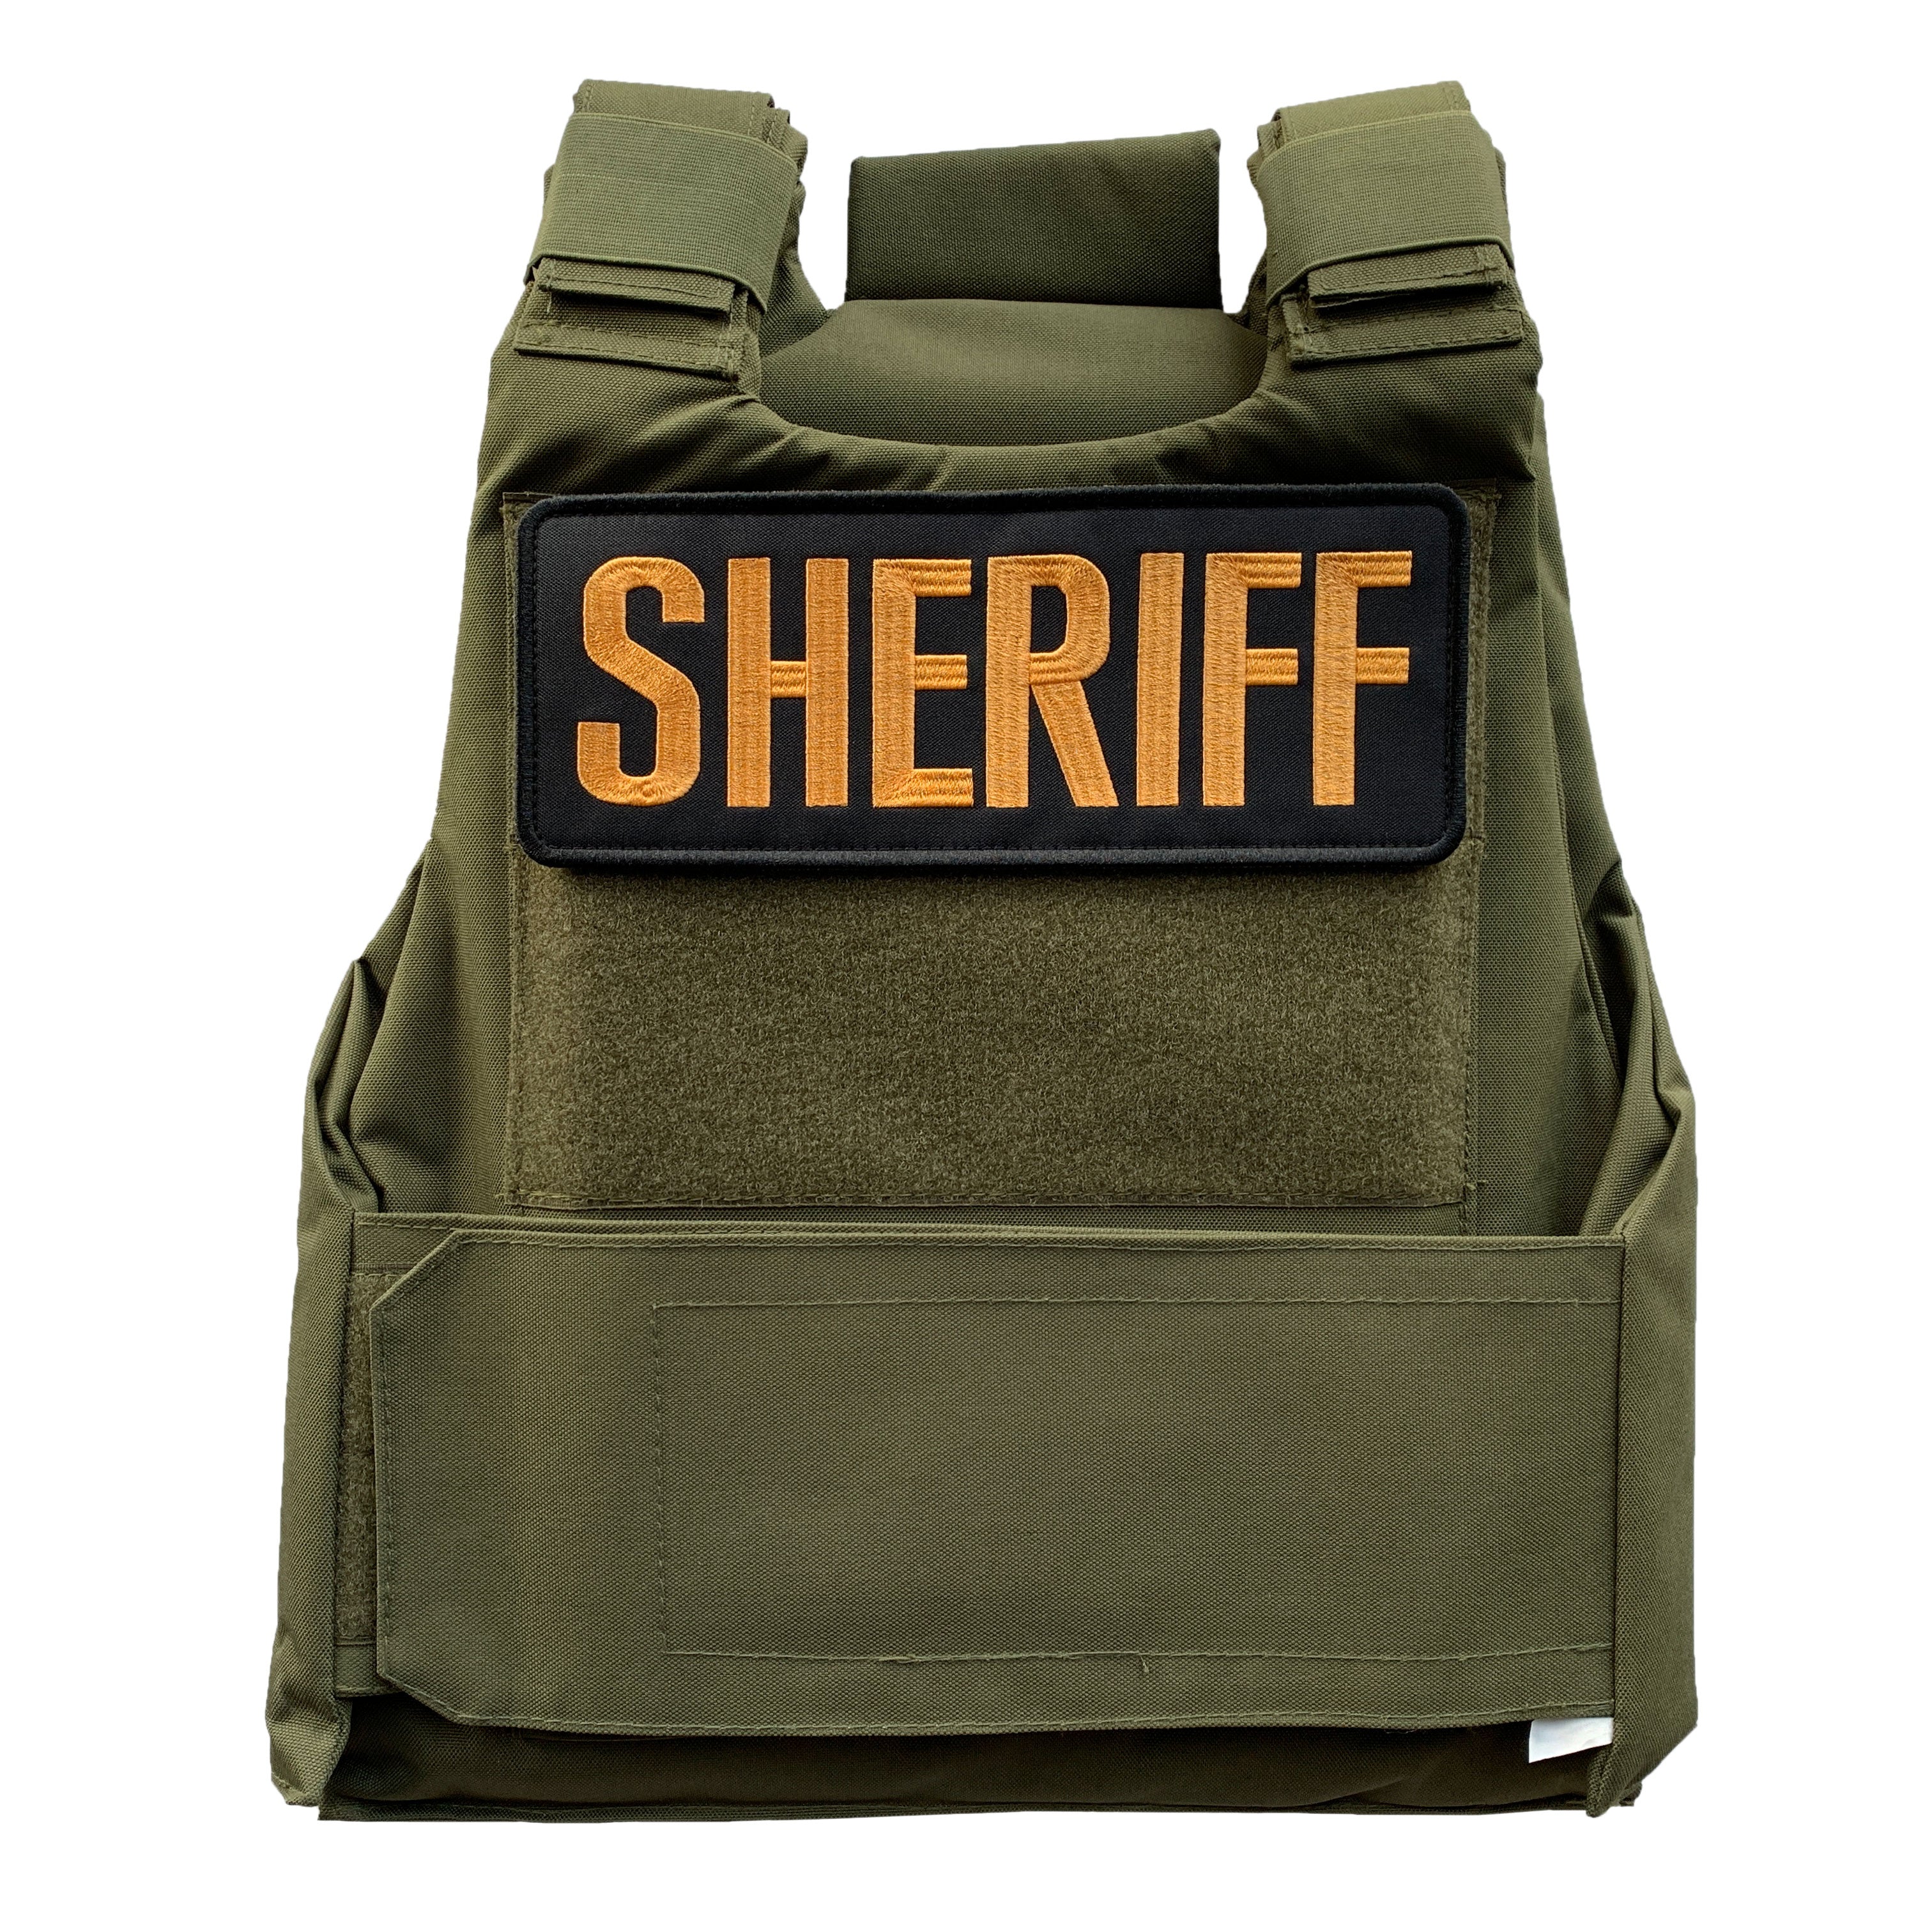 Sheriff Patch - Ace Link Armor